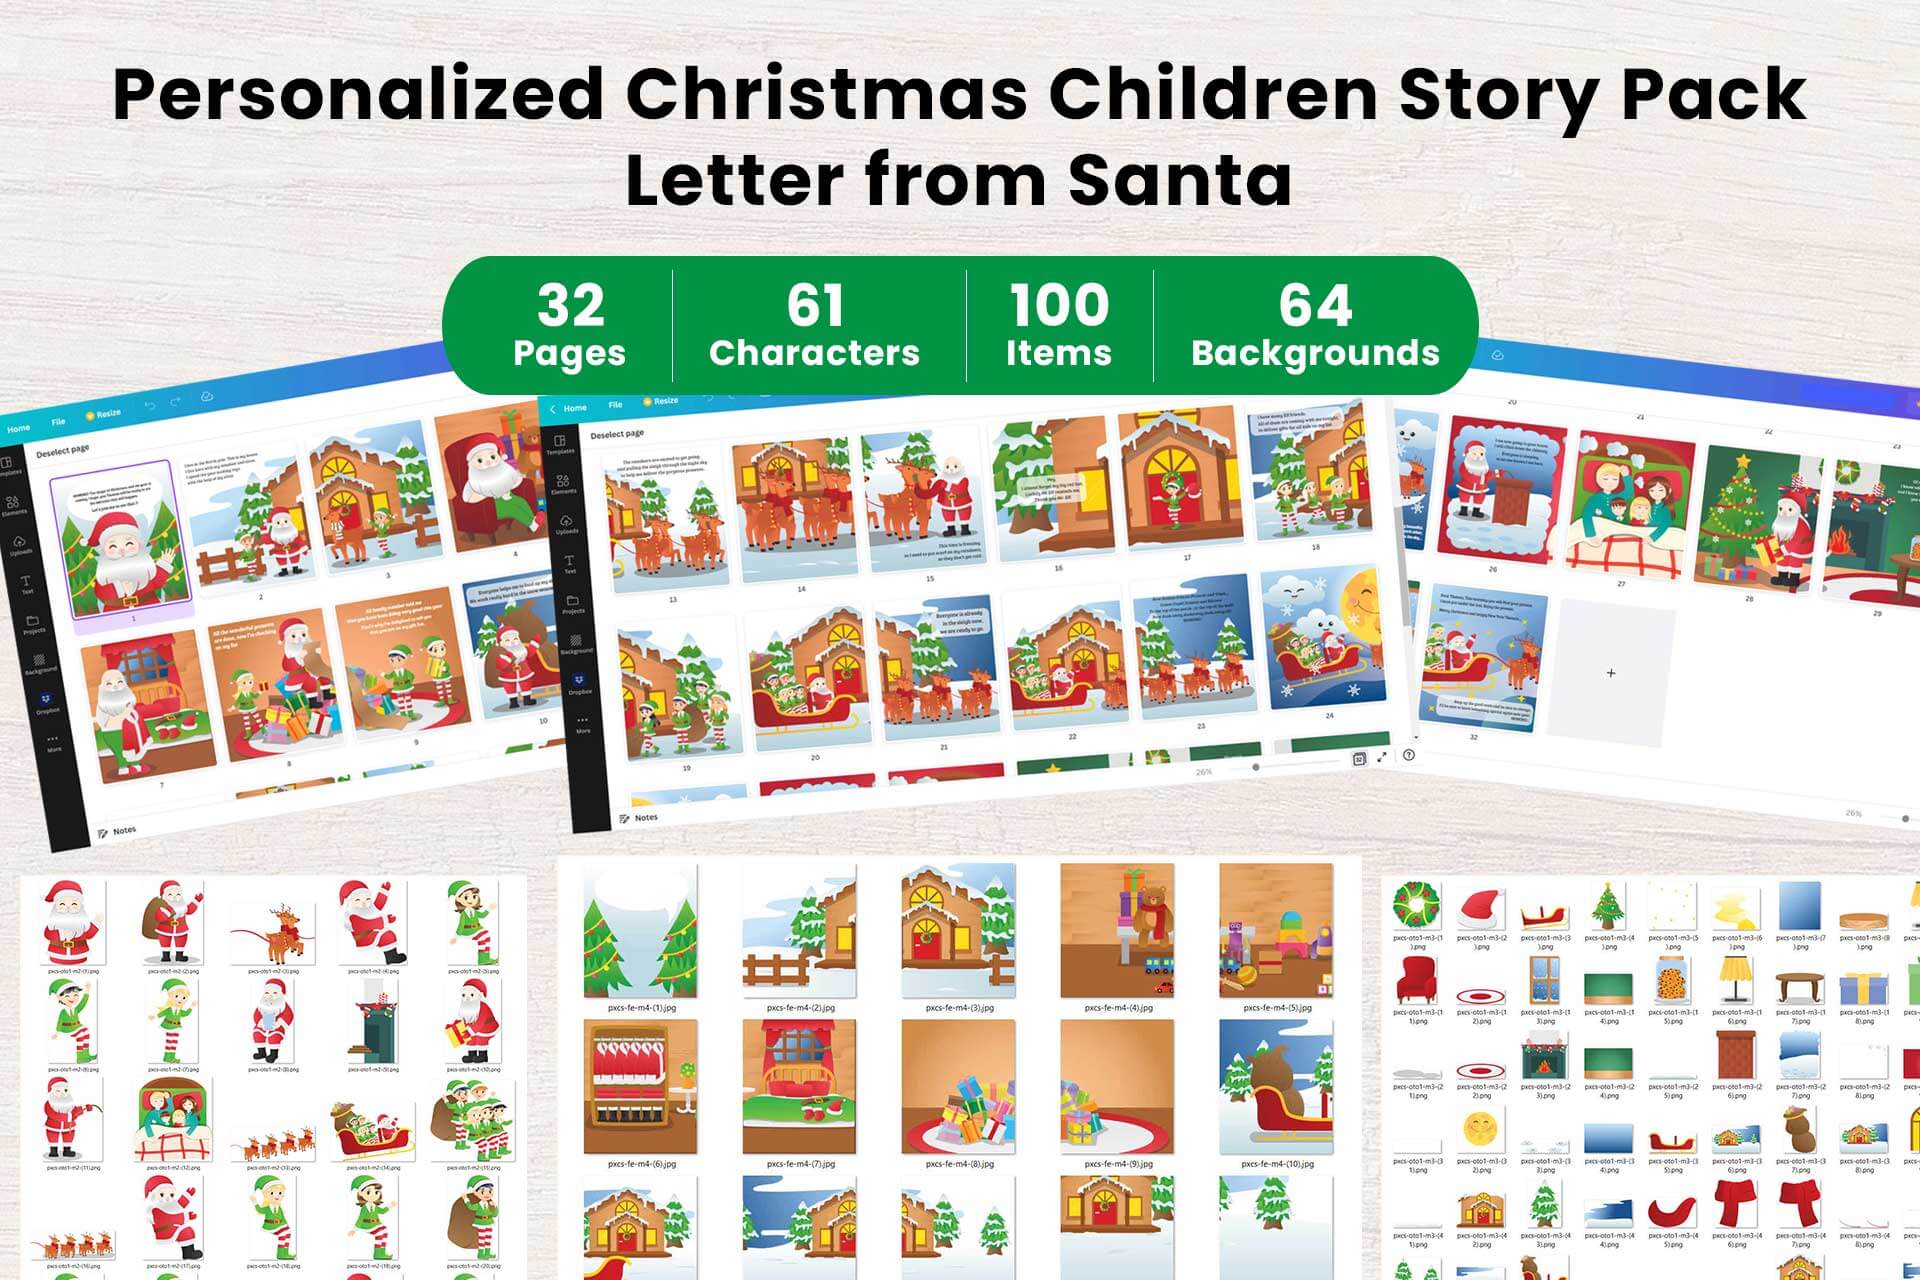 Personalized Christmas Children Story Pack